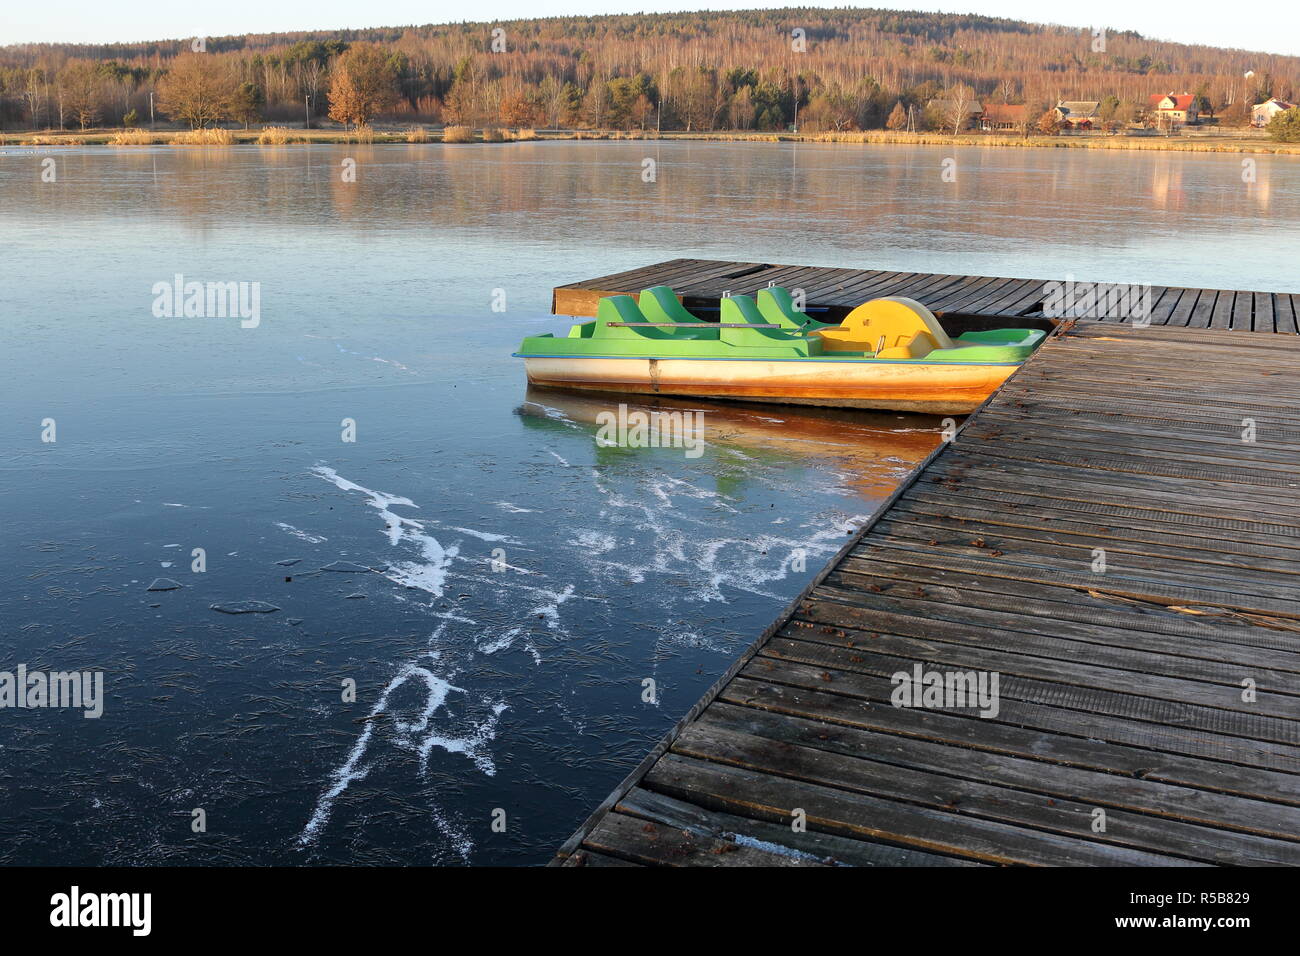 Pedalo boat trapped in ice Stock Photo